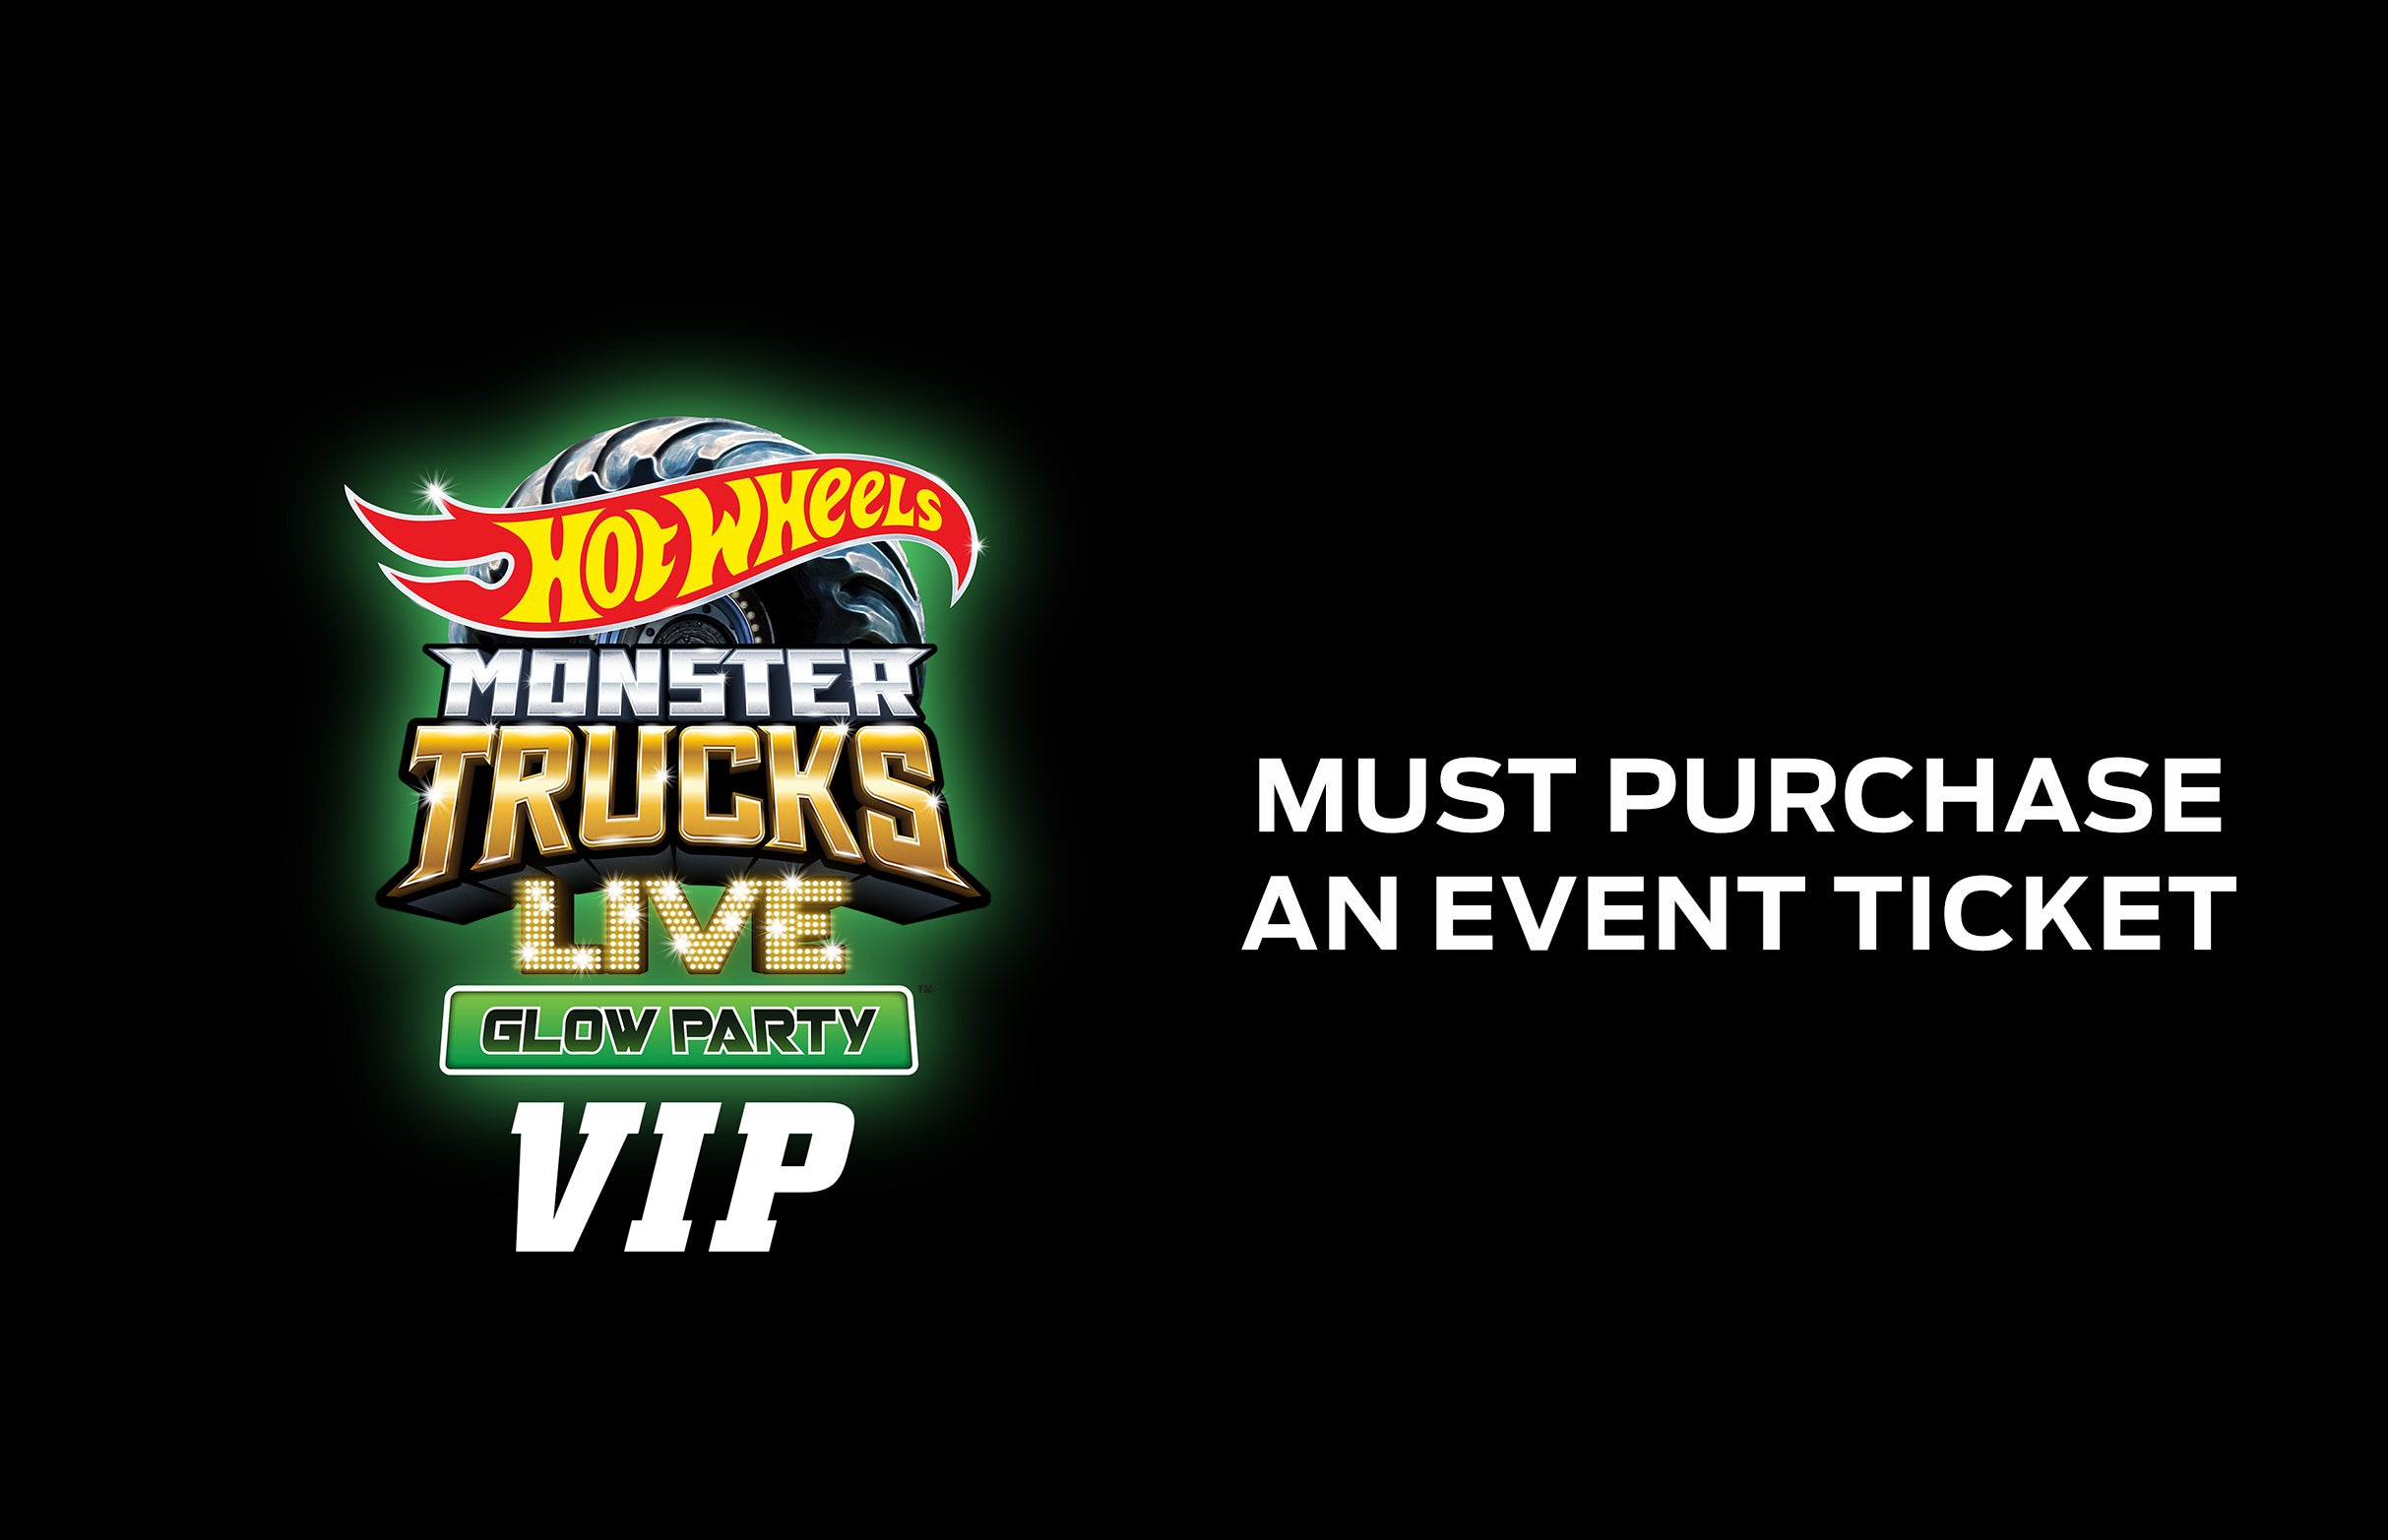 Hot Wheels VIP Backstage Experience starts at 11:30am presales in Indianapolis